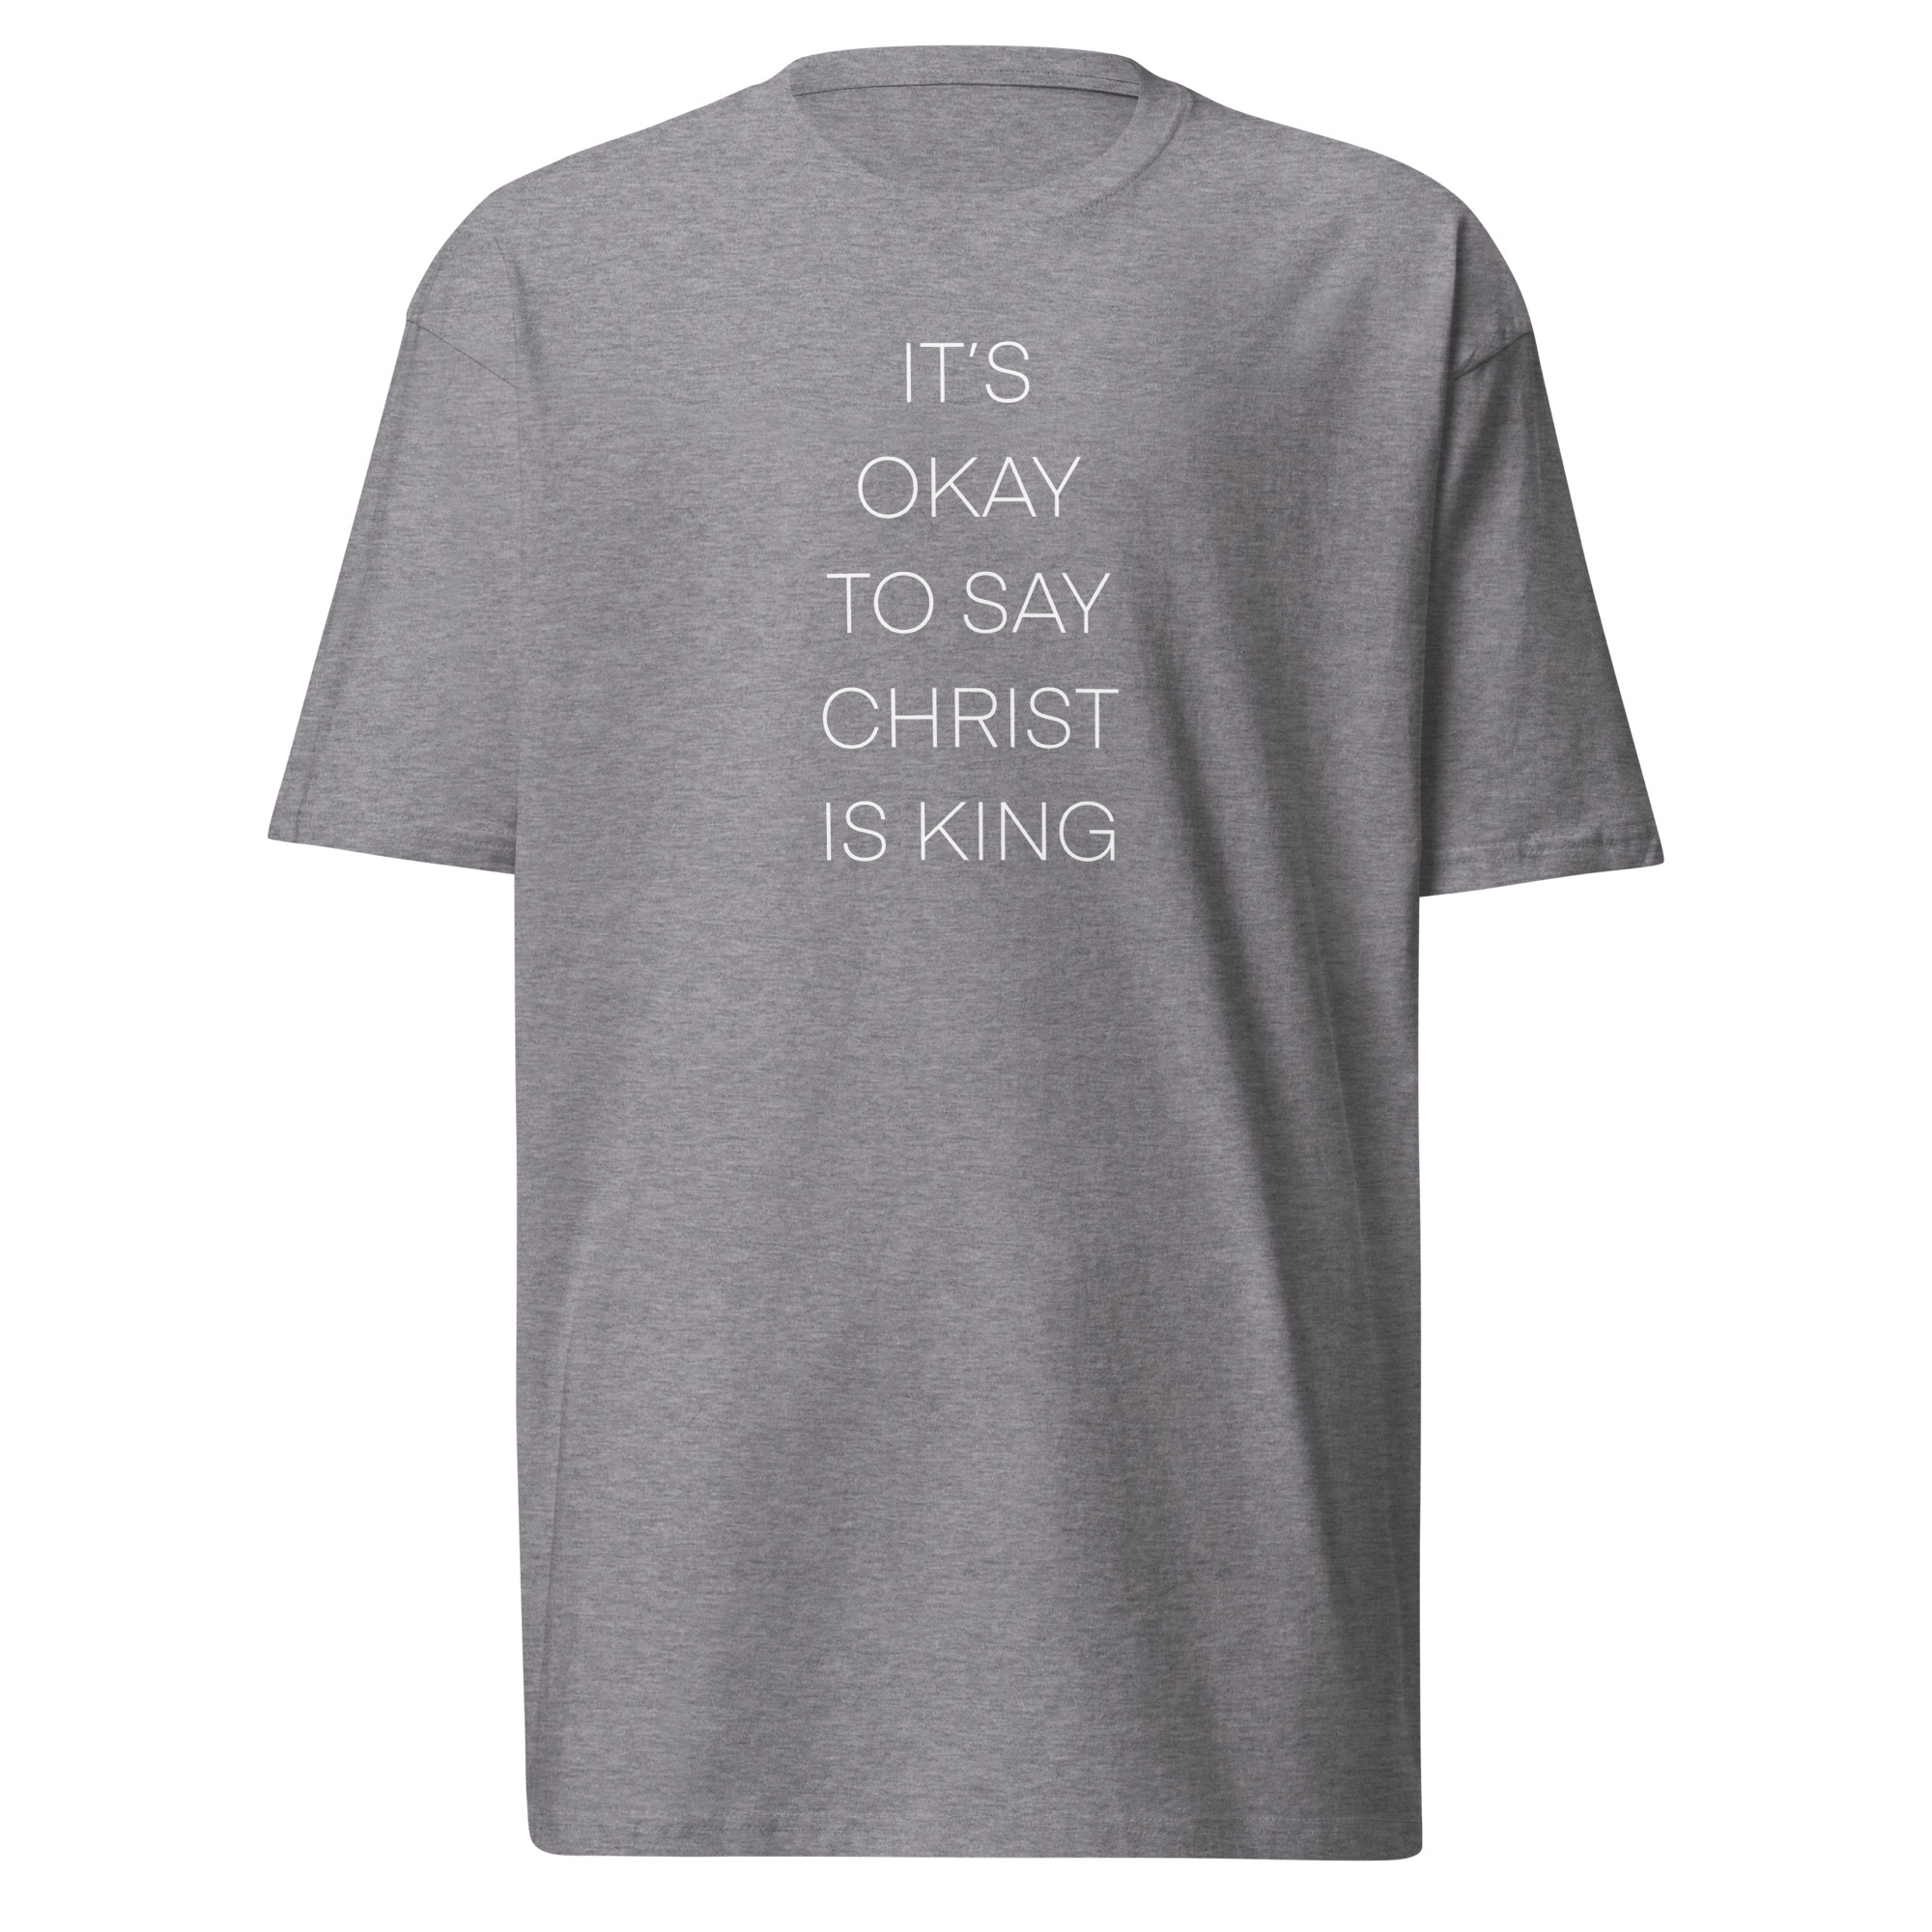 It's Okay To Say Christ Is King T-Shirt - Carbon Grey / M